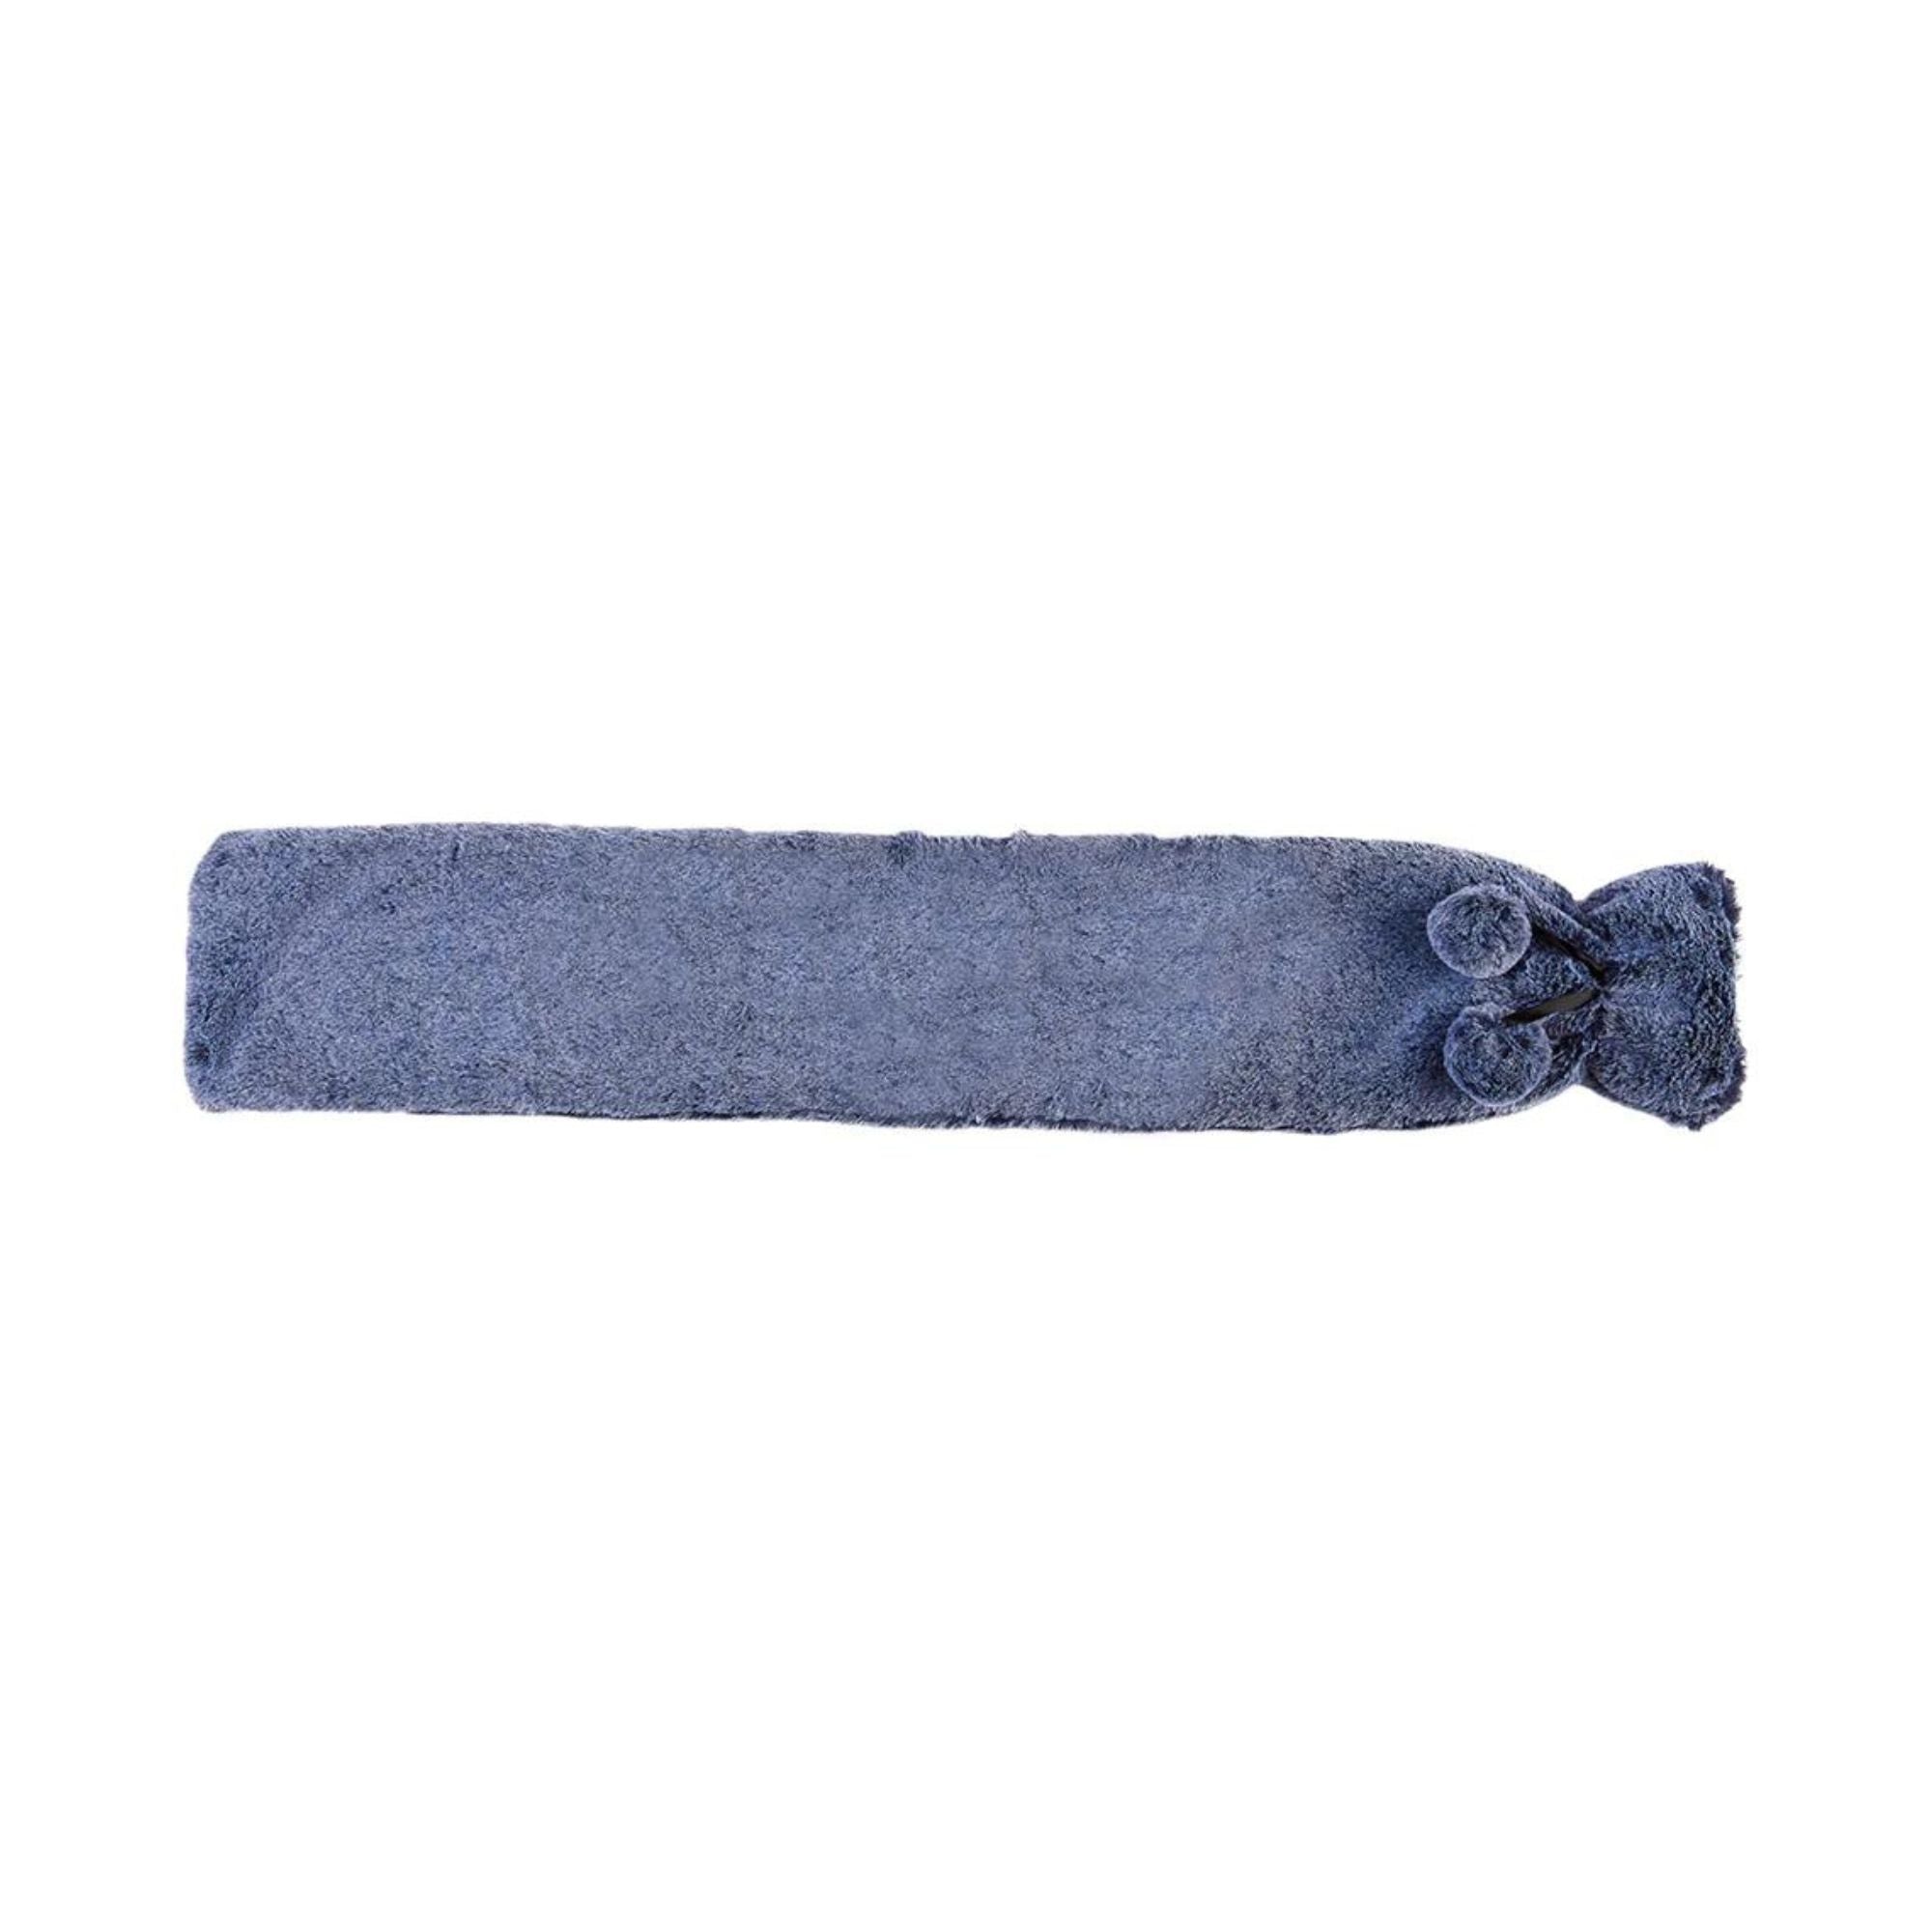 2 Litre Long Hot Water Bottle with Marshmallow Blue Faux Fur Cover